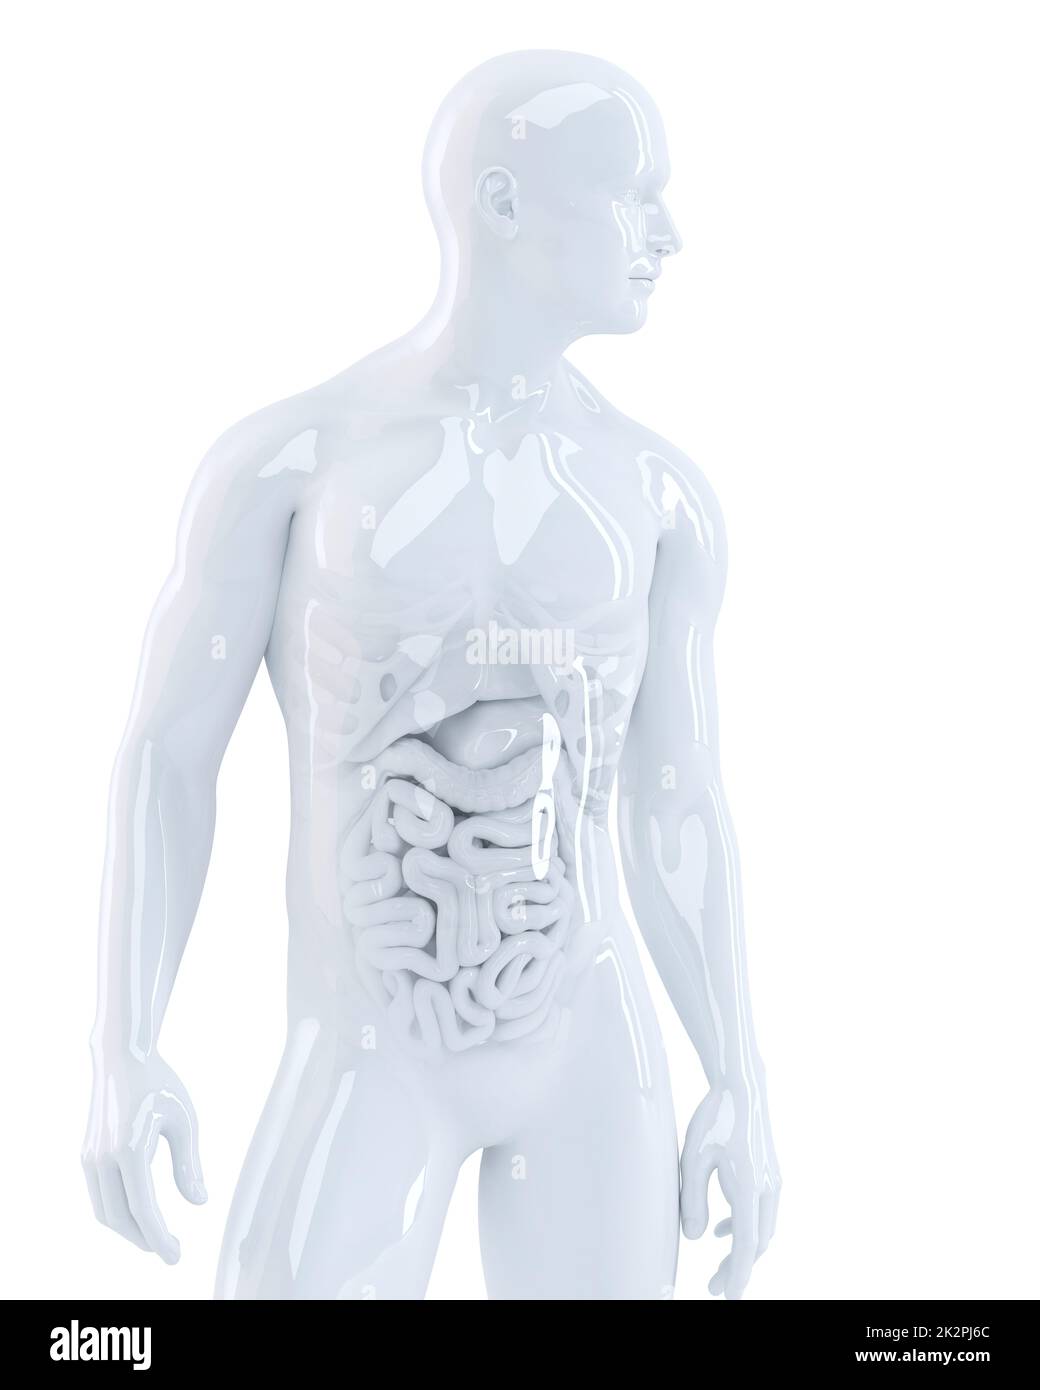 Human body with internal organs. 3d illustration. Isolated. Contains clipping path Stock Photo